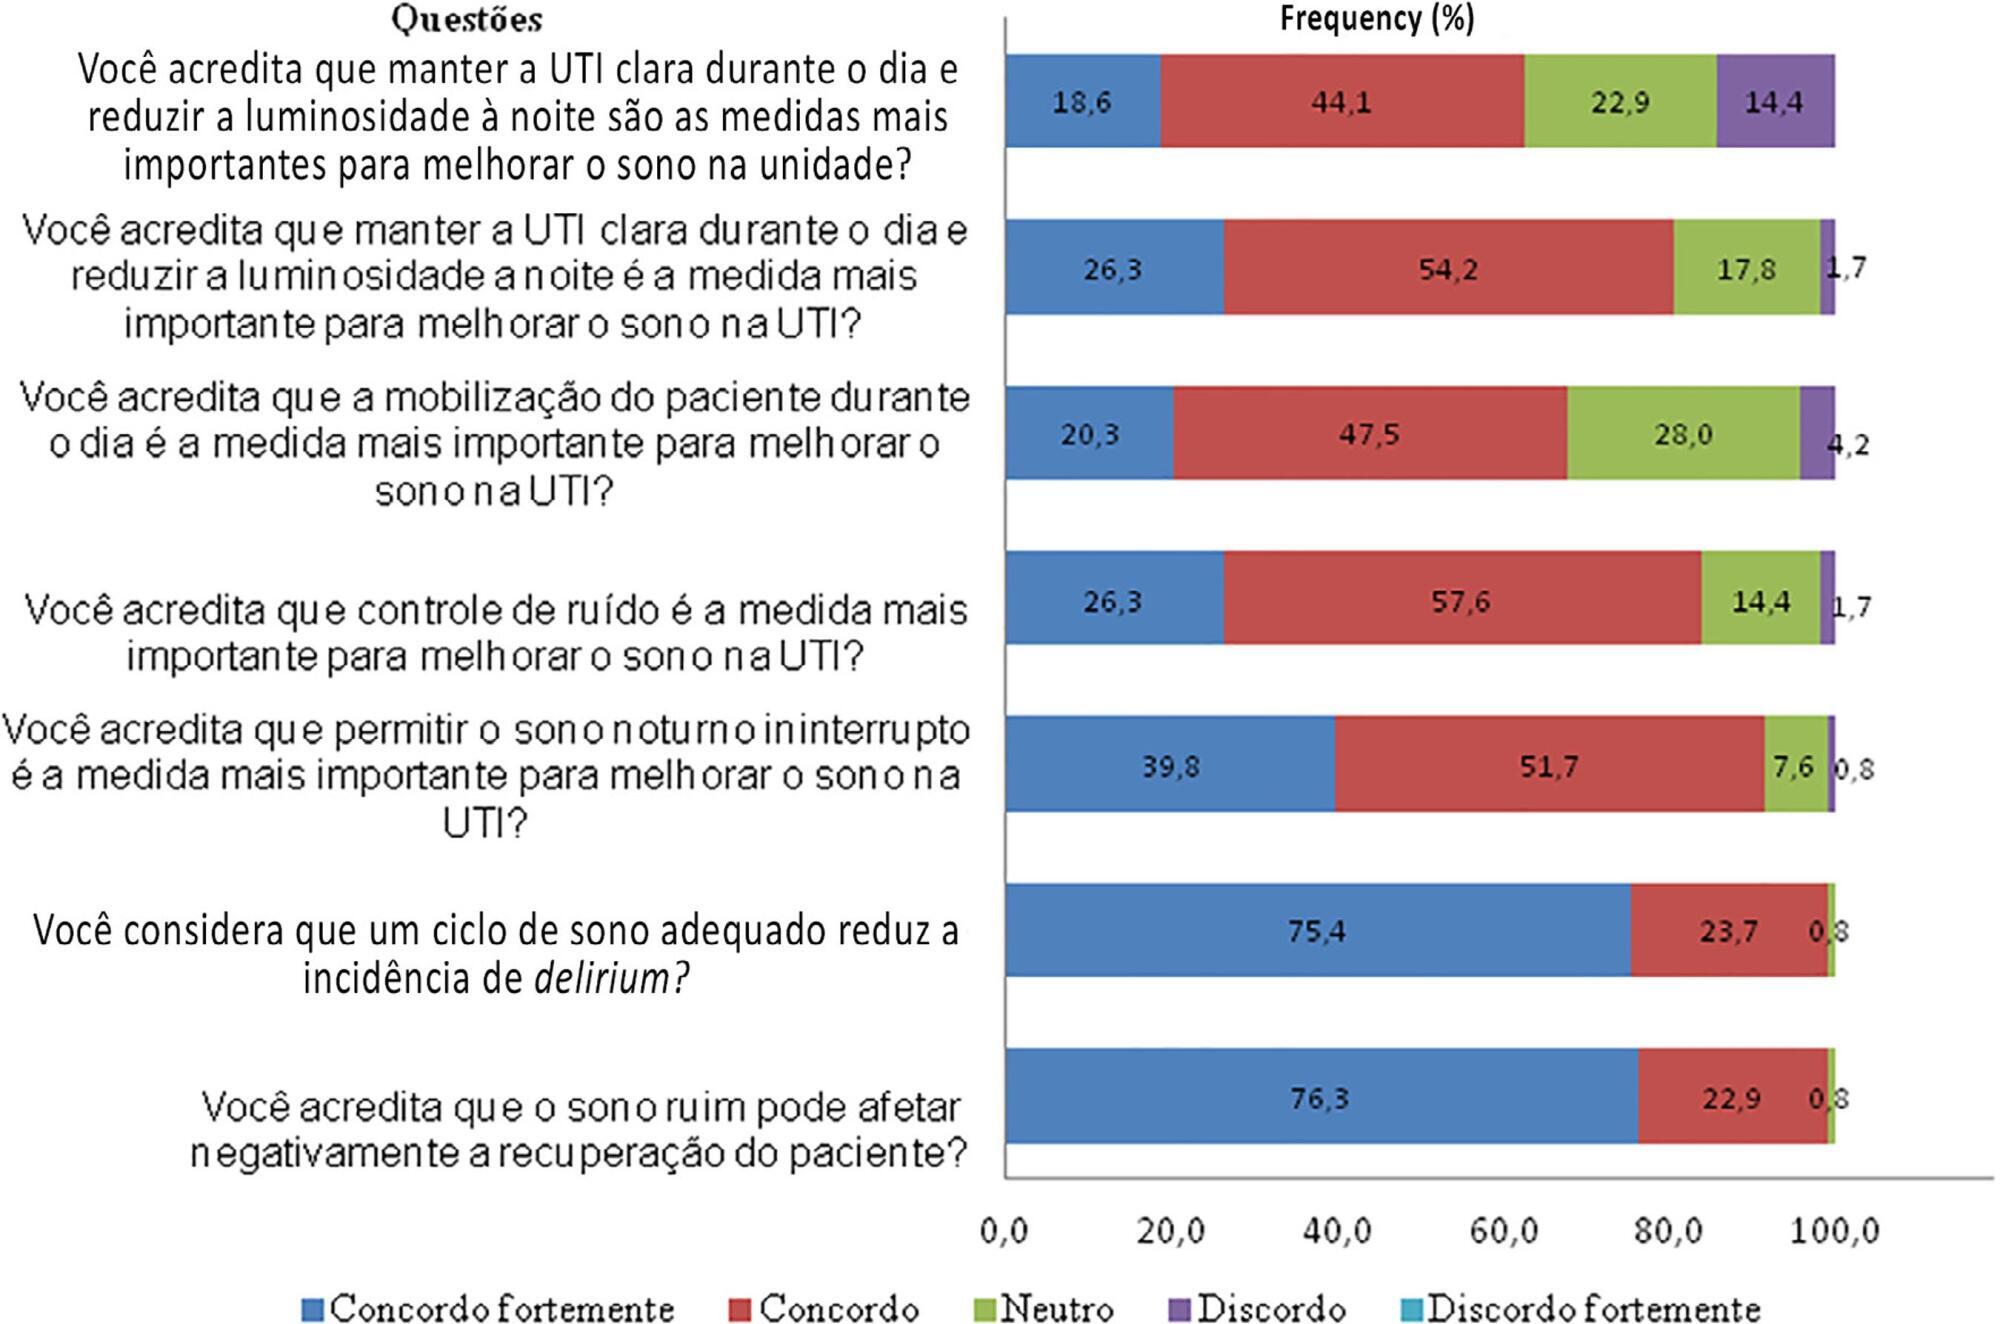 Practices for promoting sleep in intensive care units in Brazil: a national survey